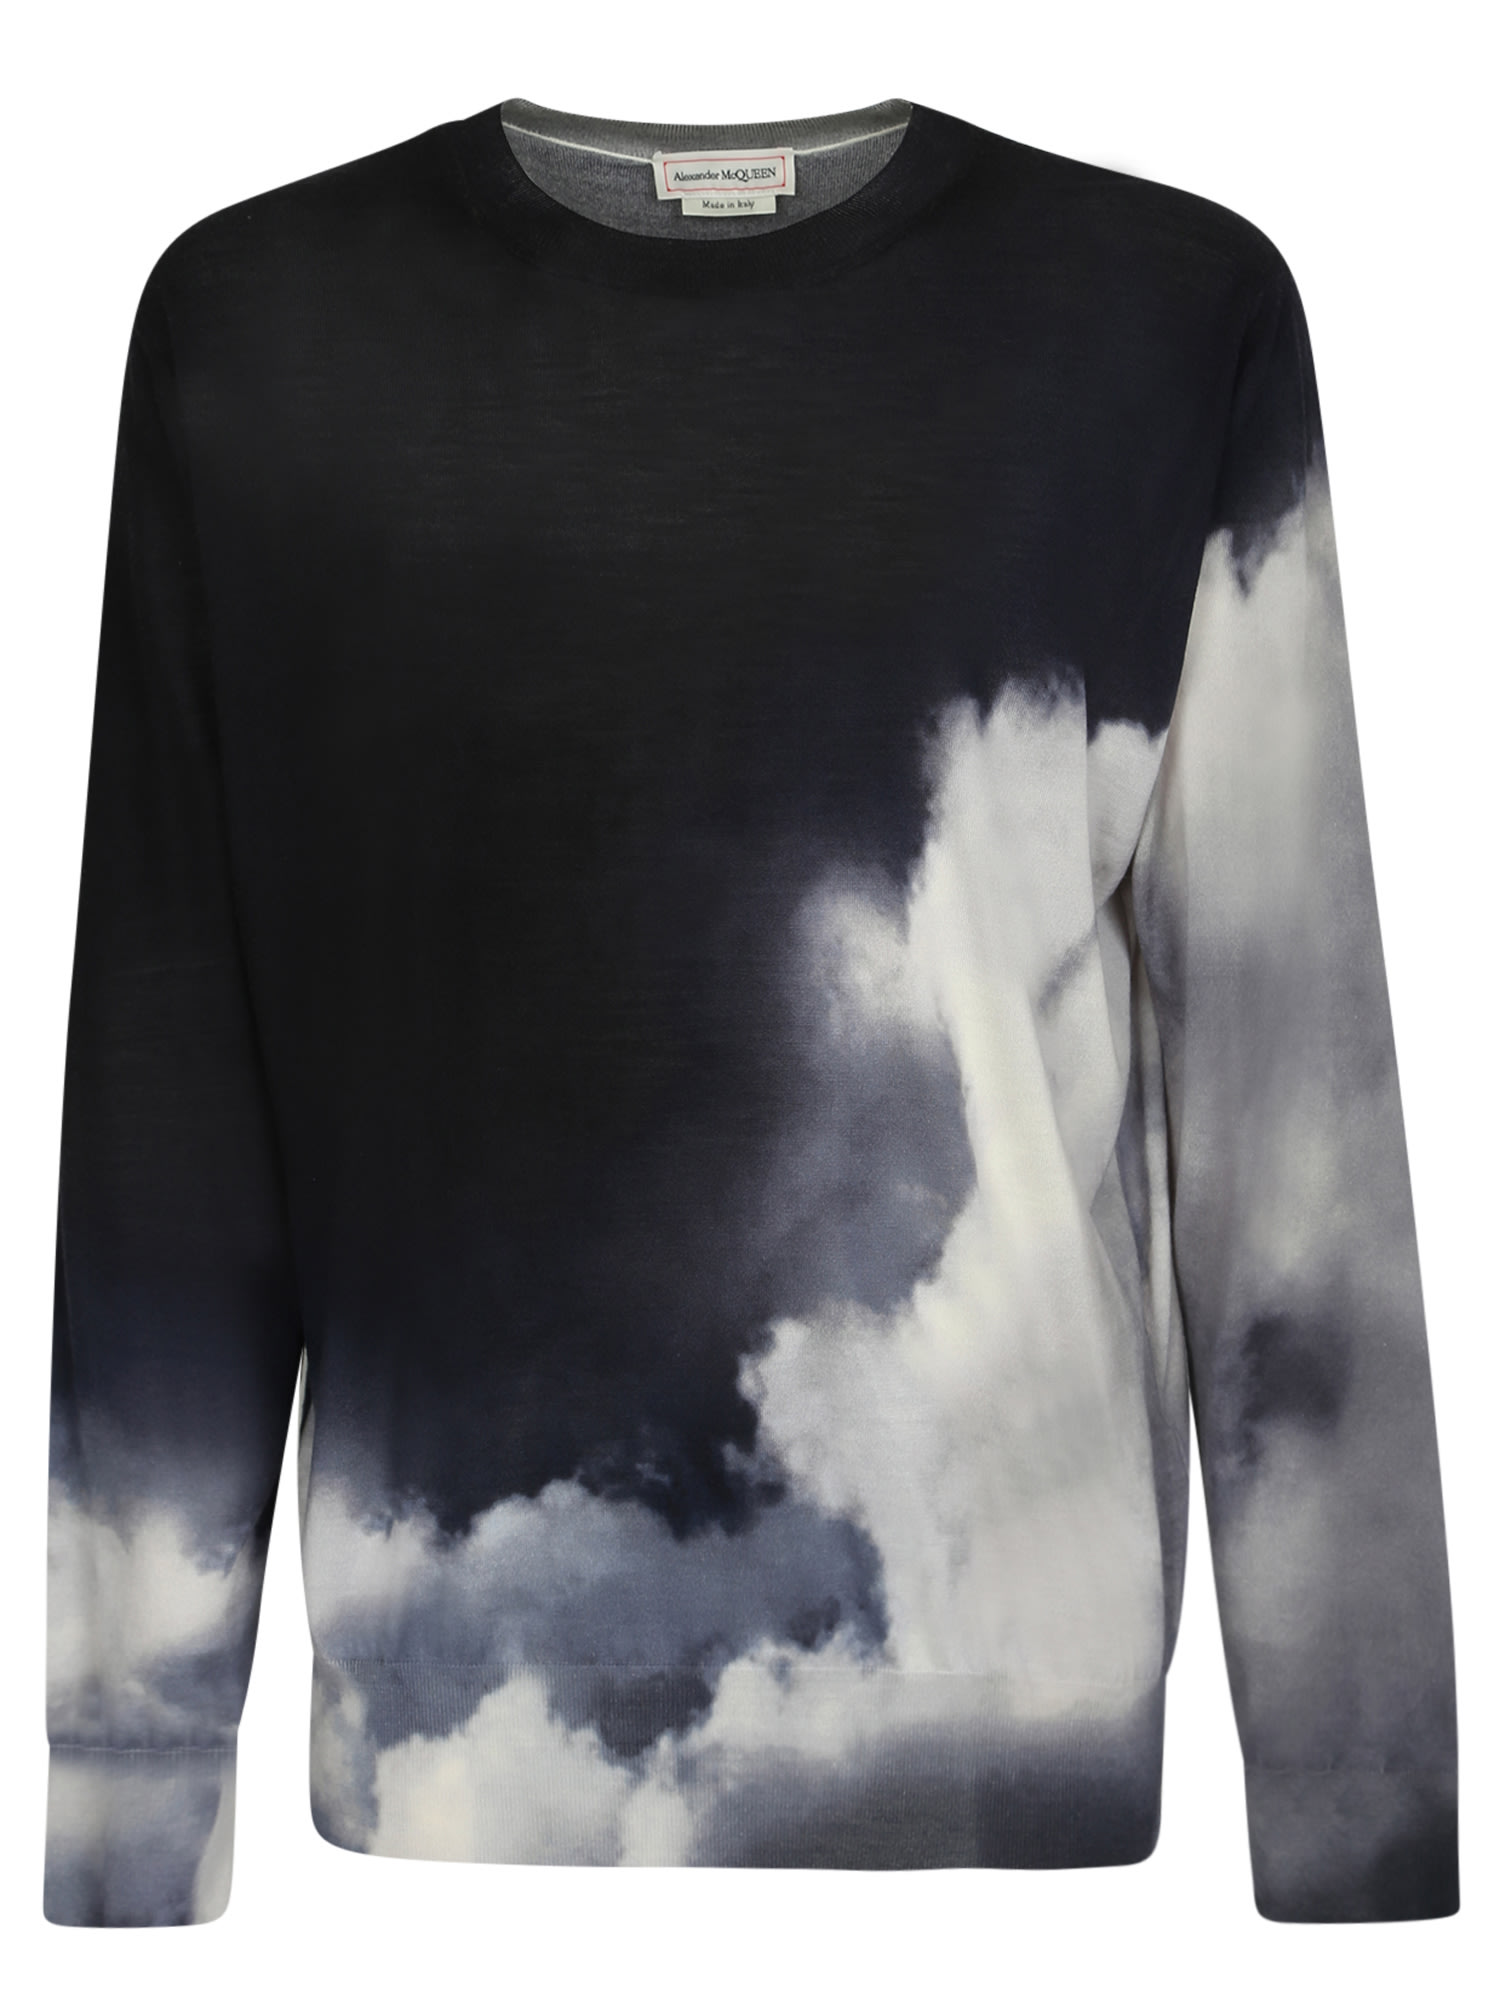 Alexander McQueen Soft, Thin And Delicate Pull Over With White Clouds Print